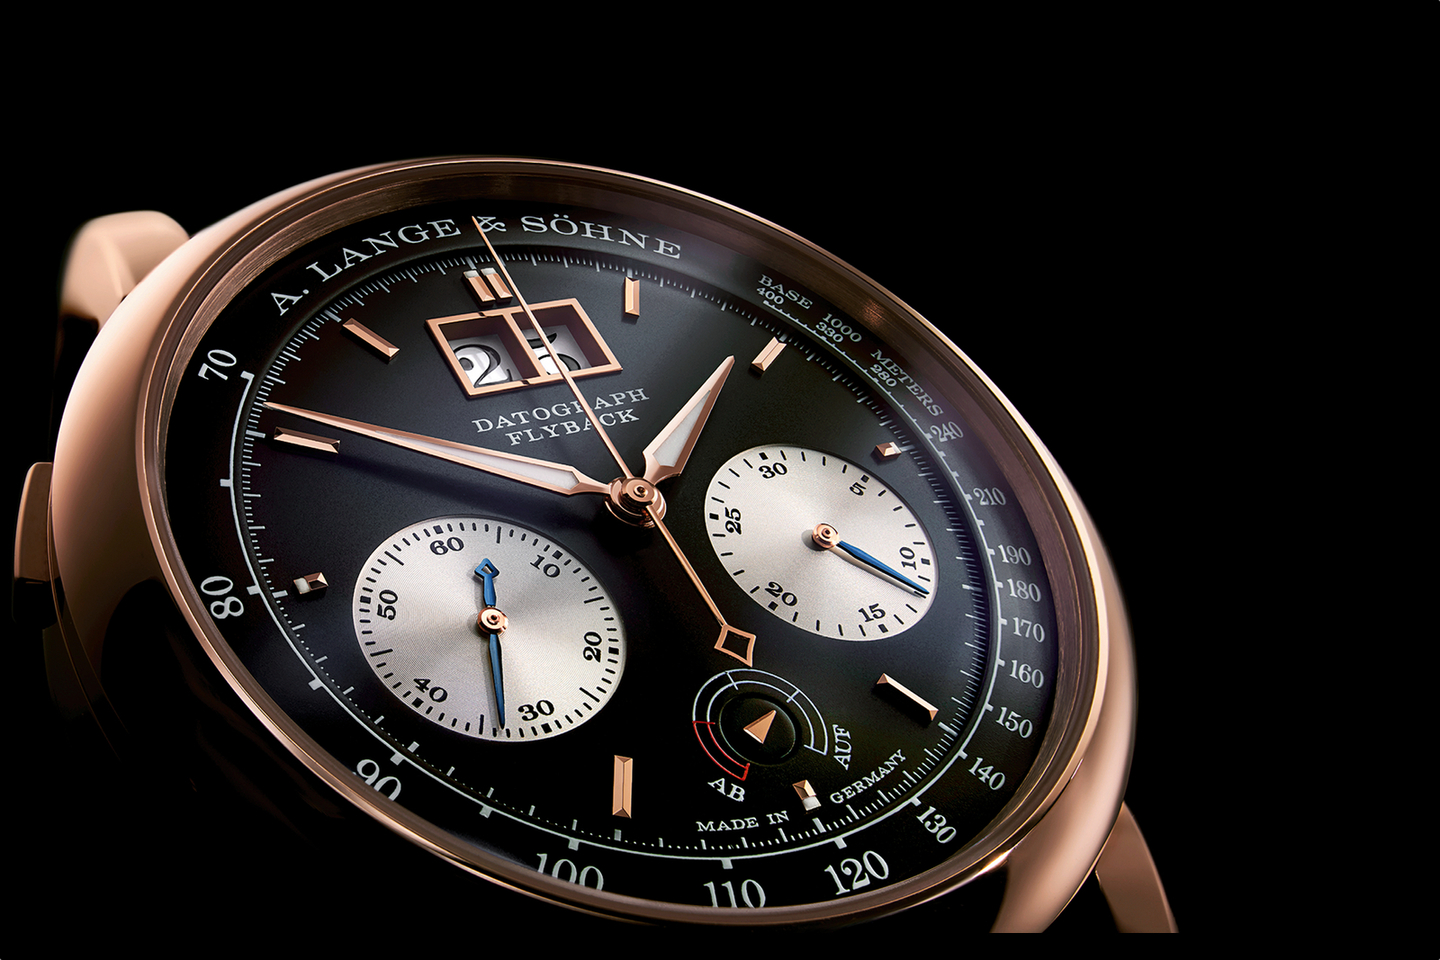 Lange launches the Datograph Up/Down in pink gold